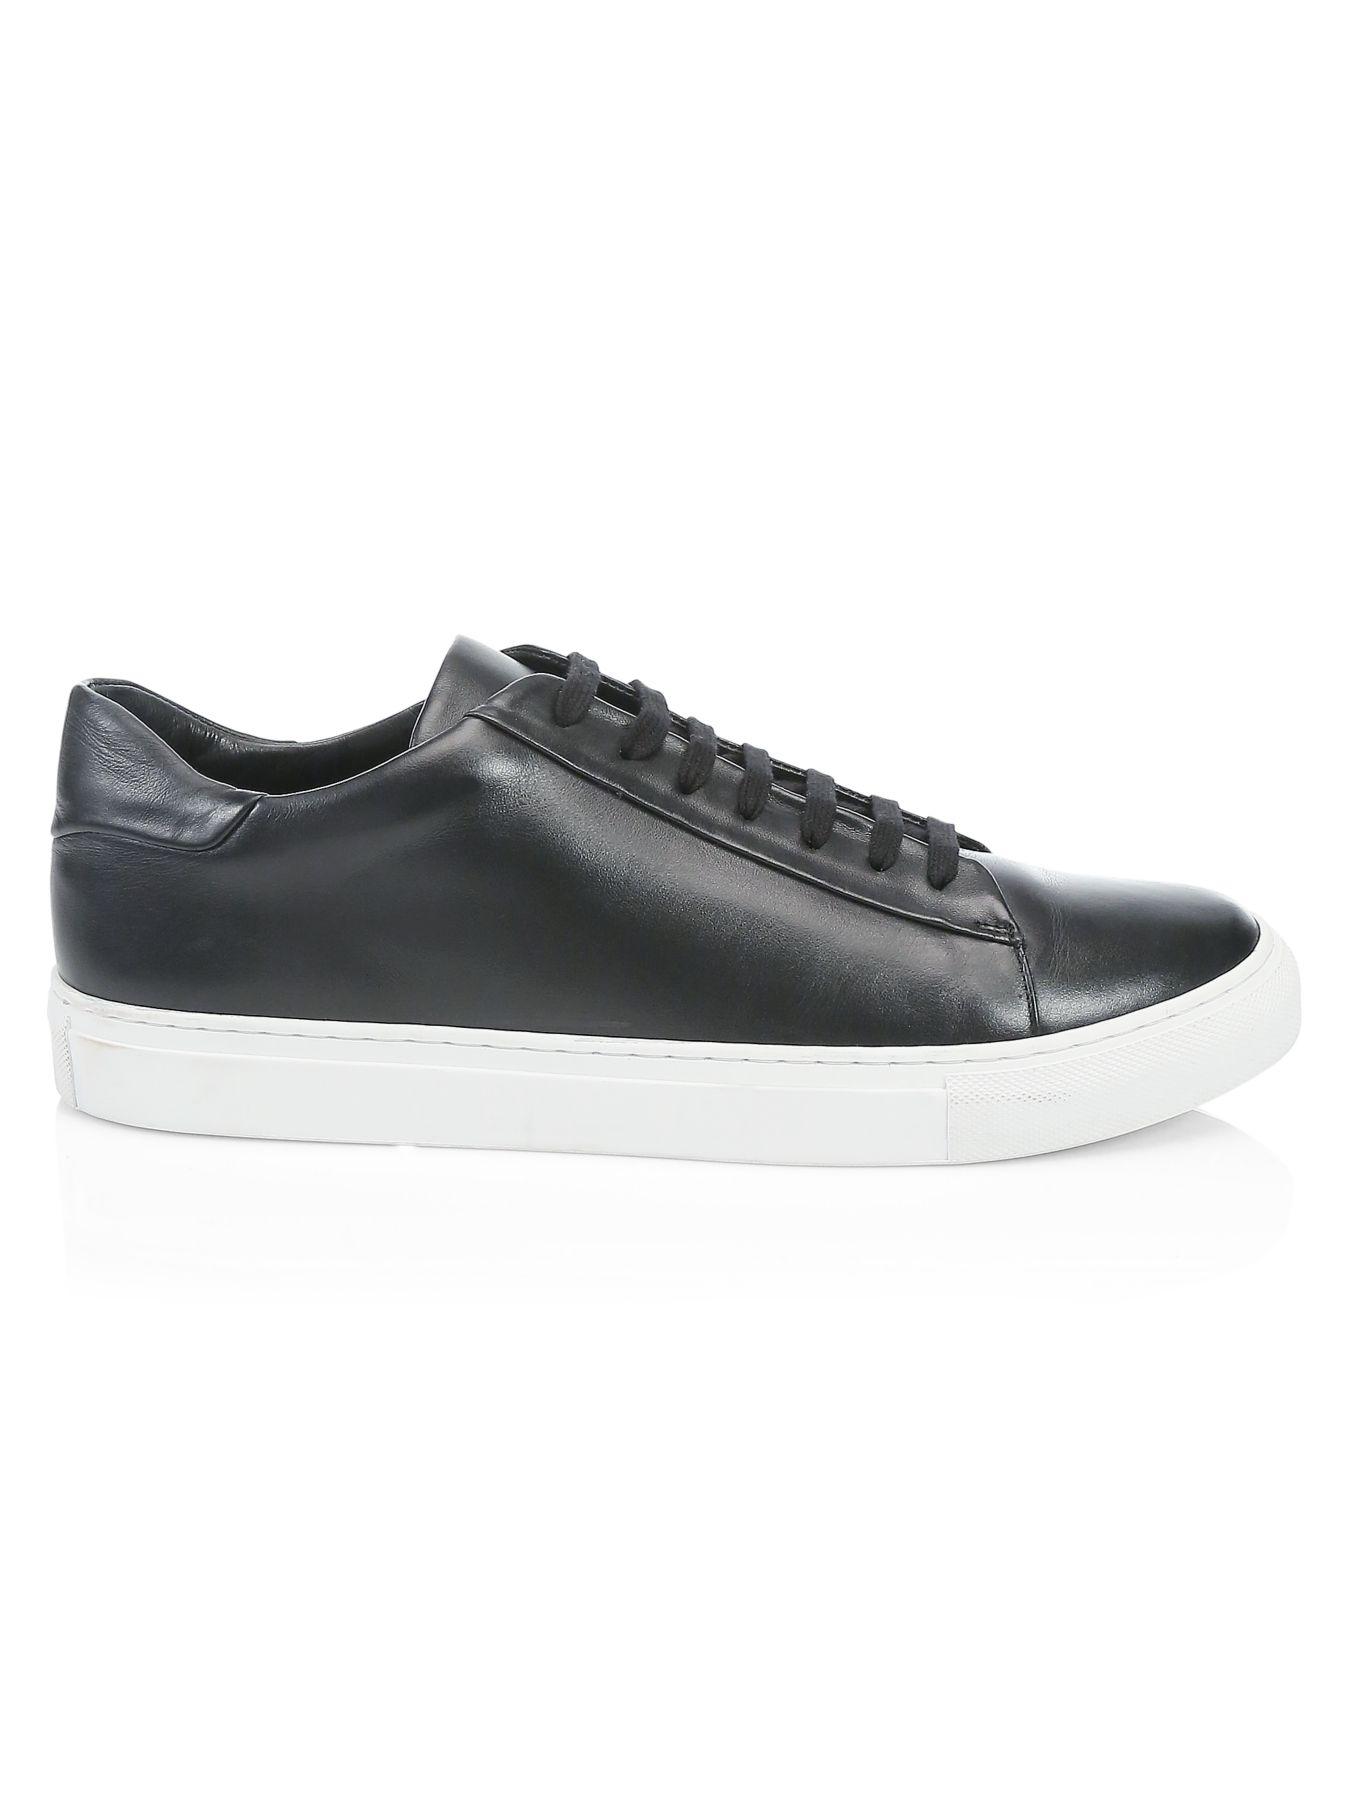 Saks Fifth Avenue Collection Leather Sneakers in Black for Men - Lyst